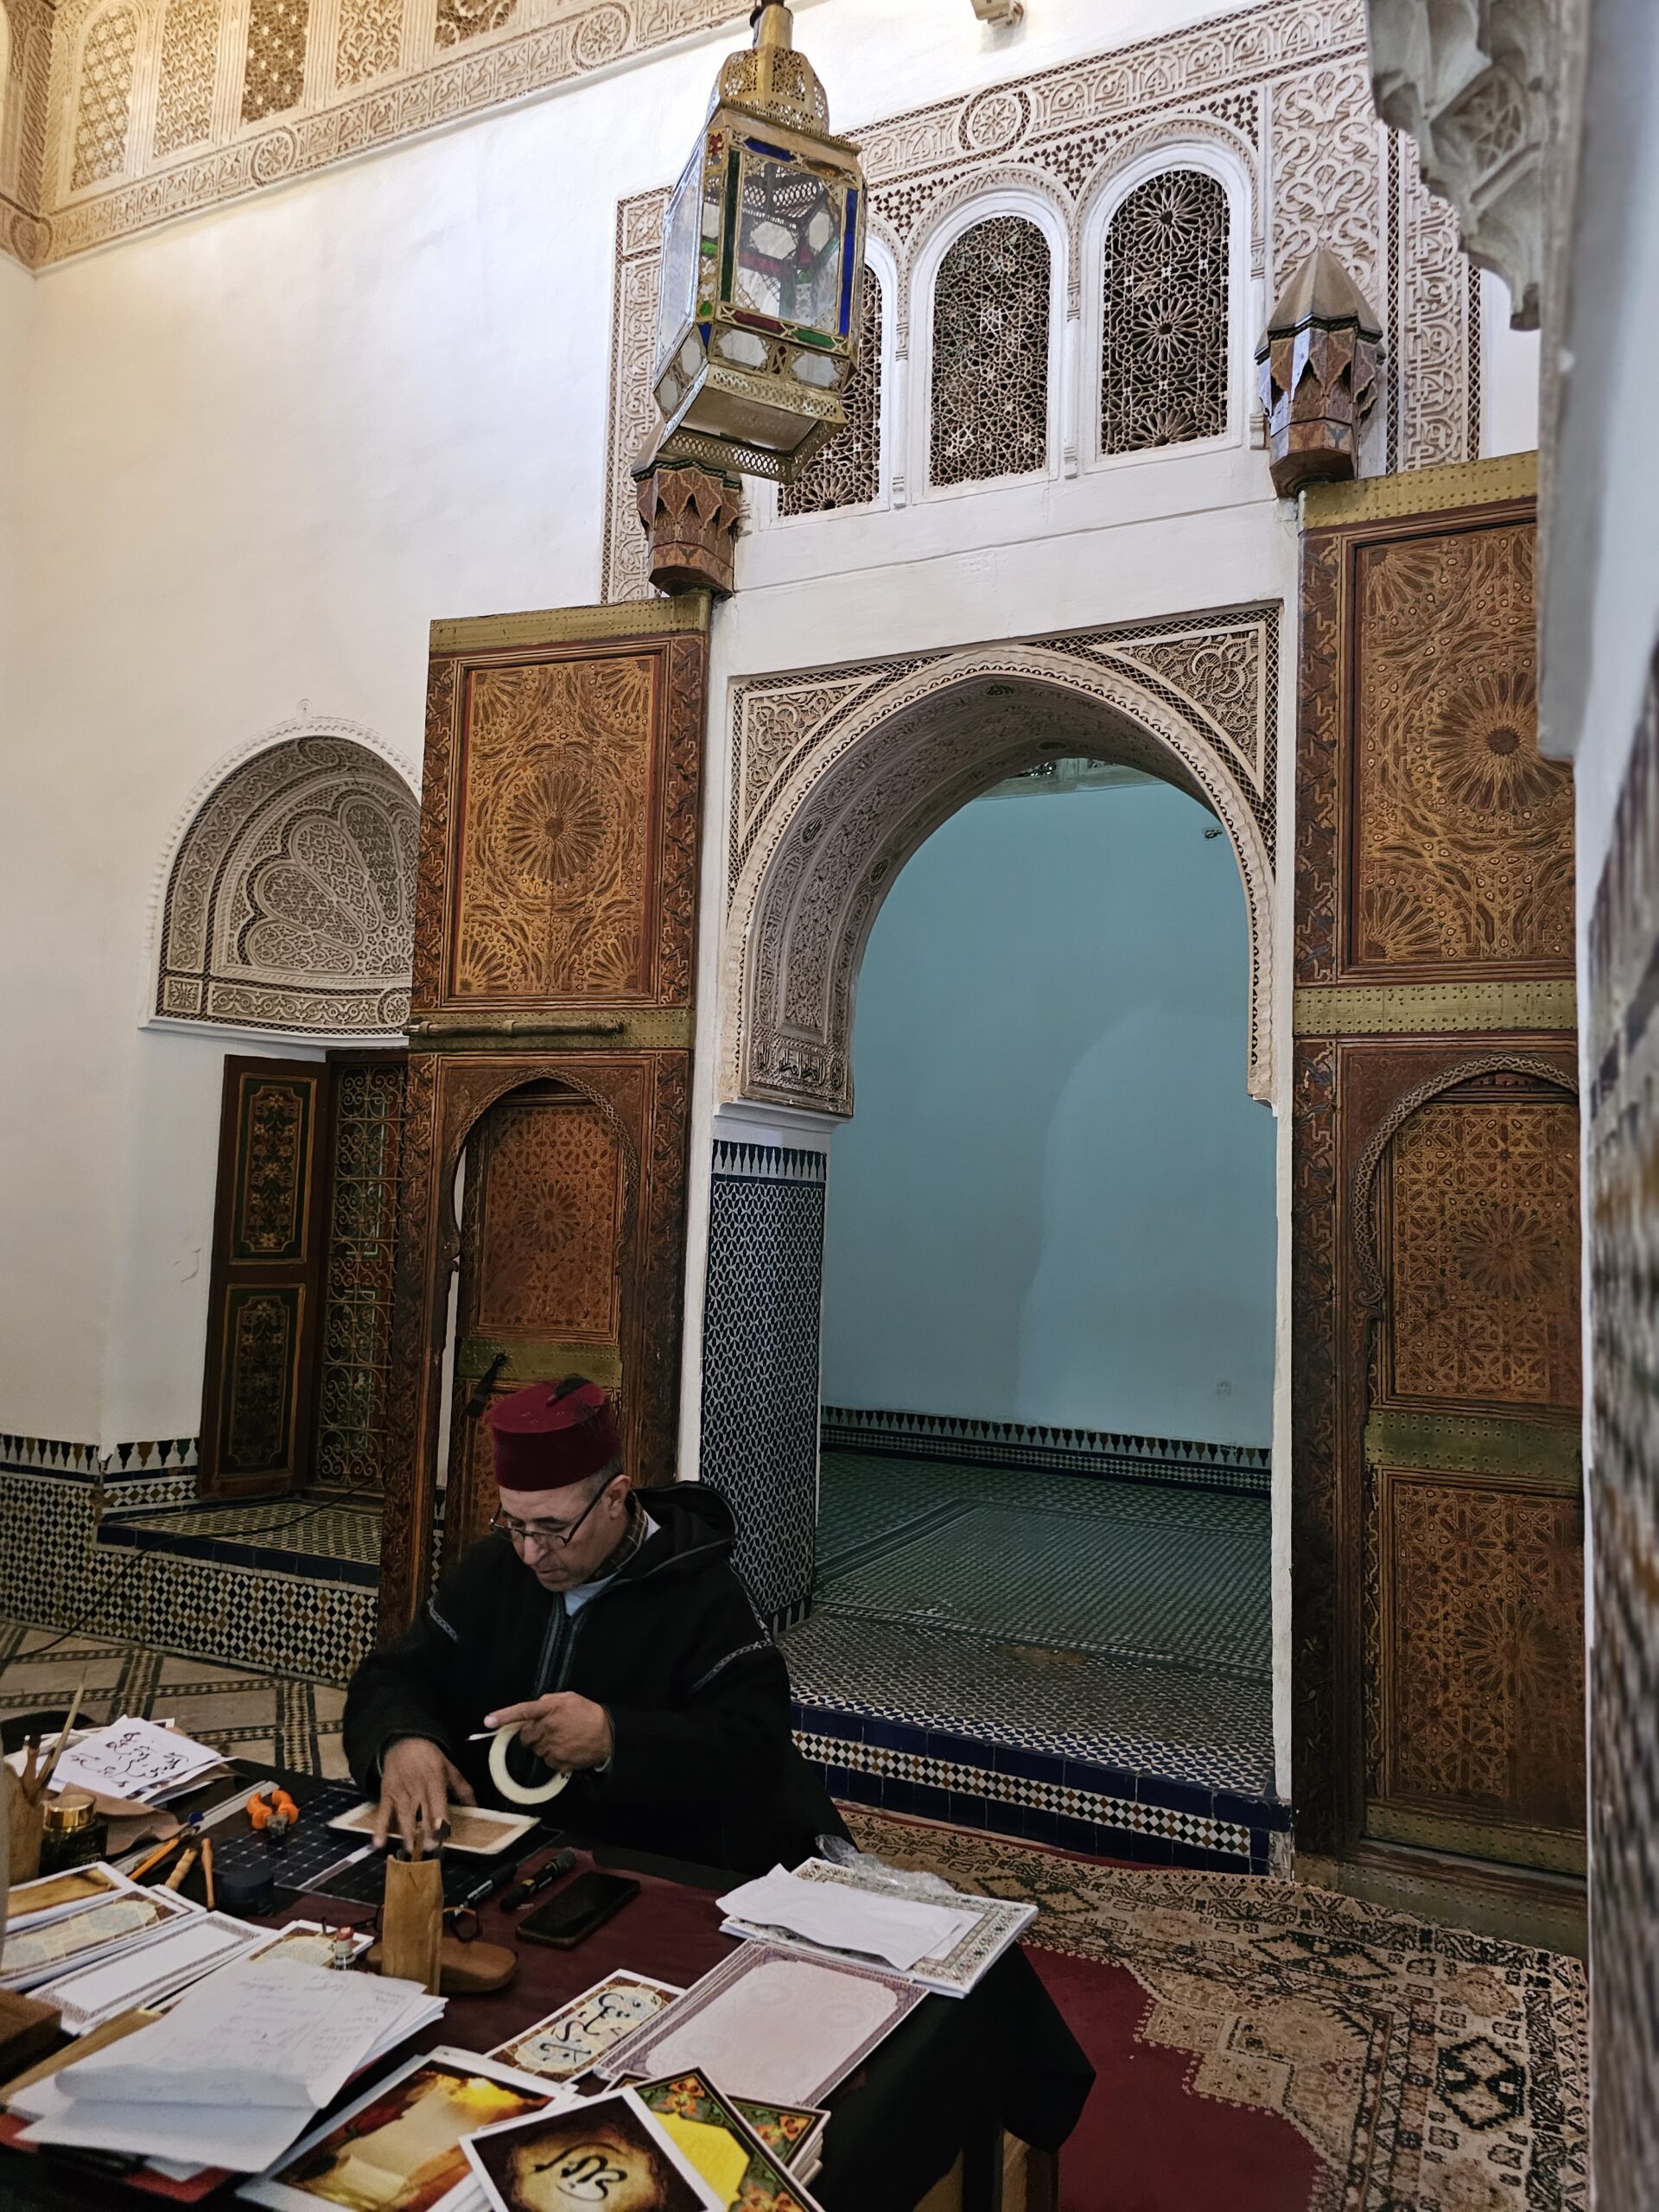 A scribe sits on the floor in front of a doorway at Bahia Palace, Marrakesh. He has books and papers in front of him. Image by 360onhistory.com